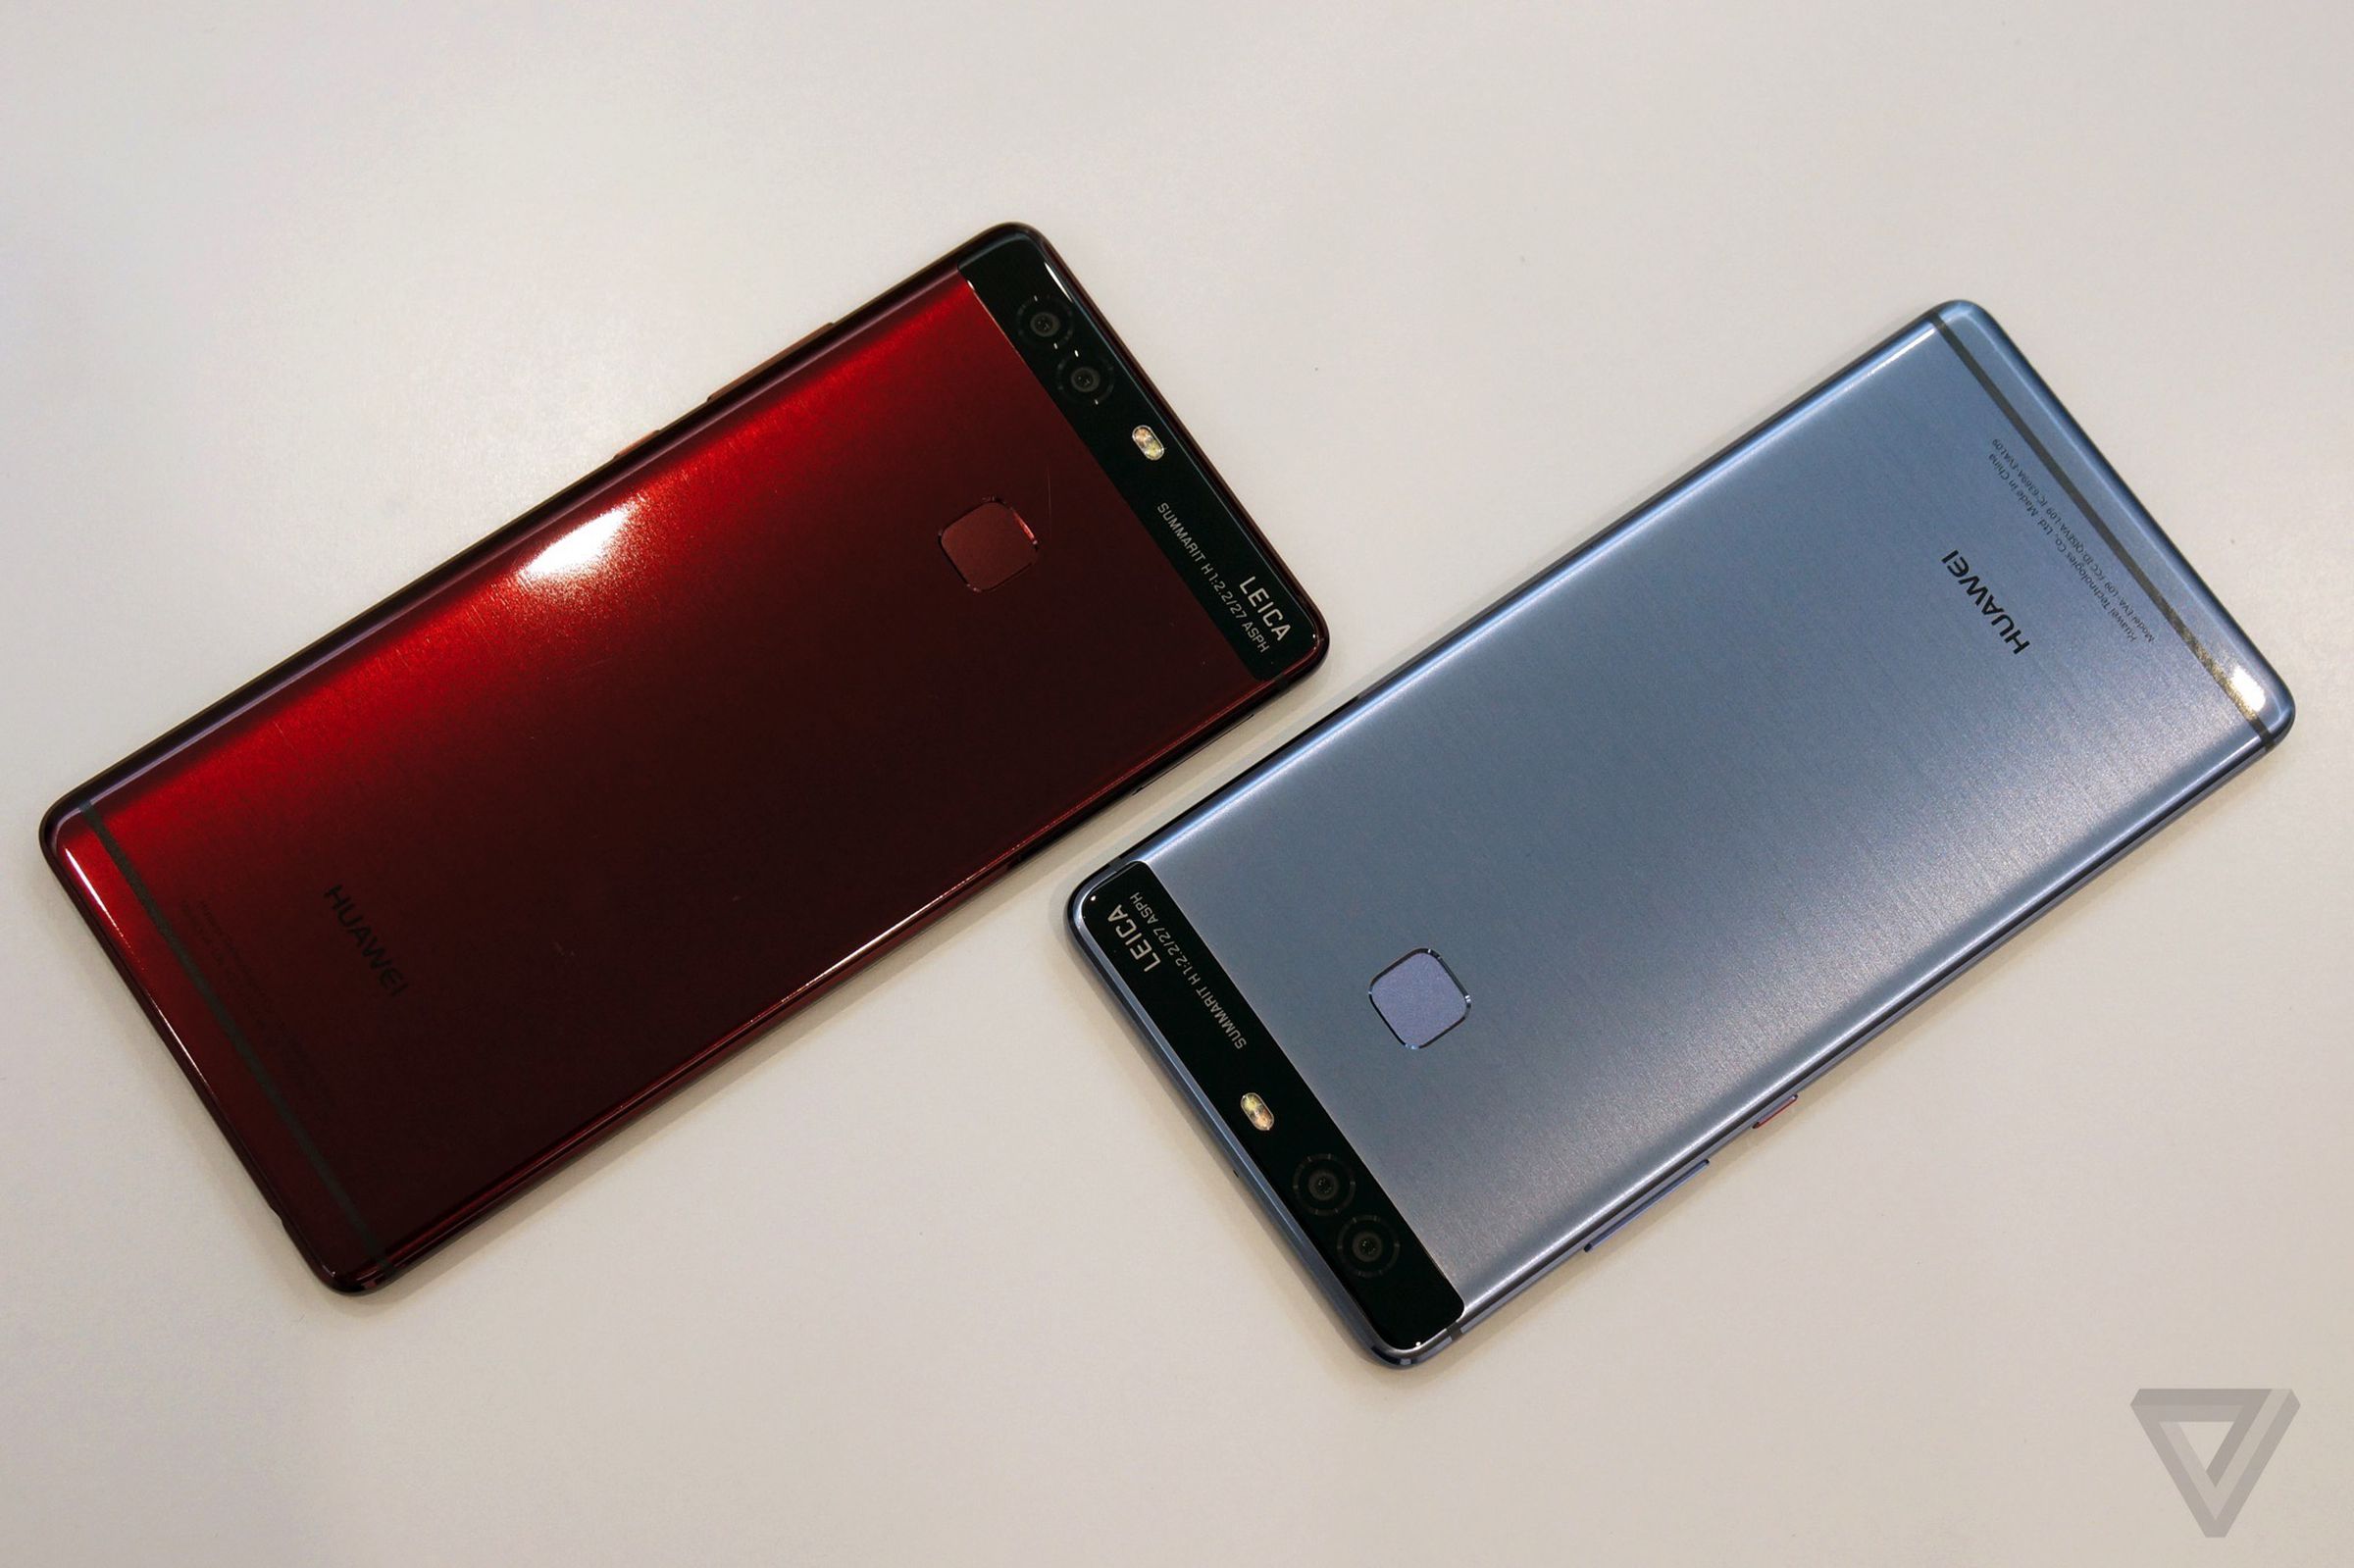 Huawei P9 in red and blue